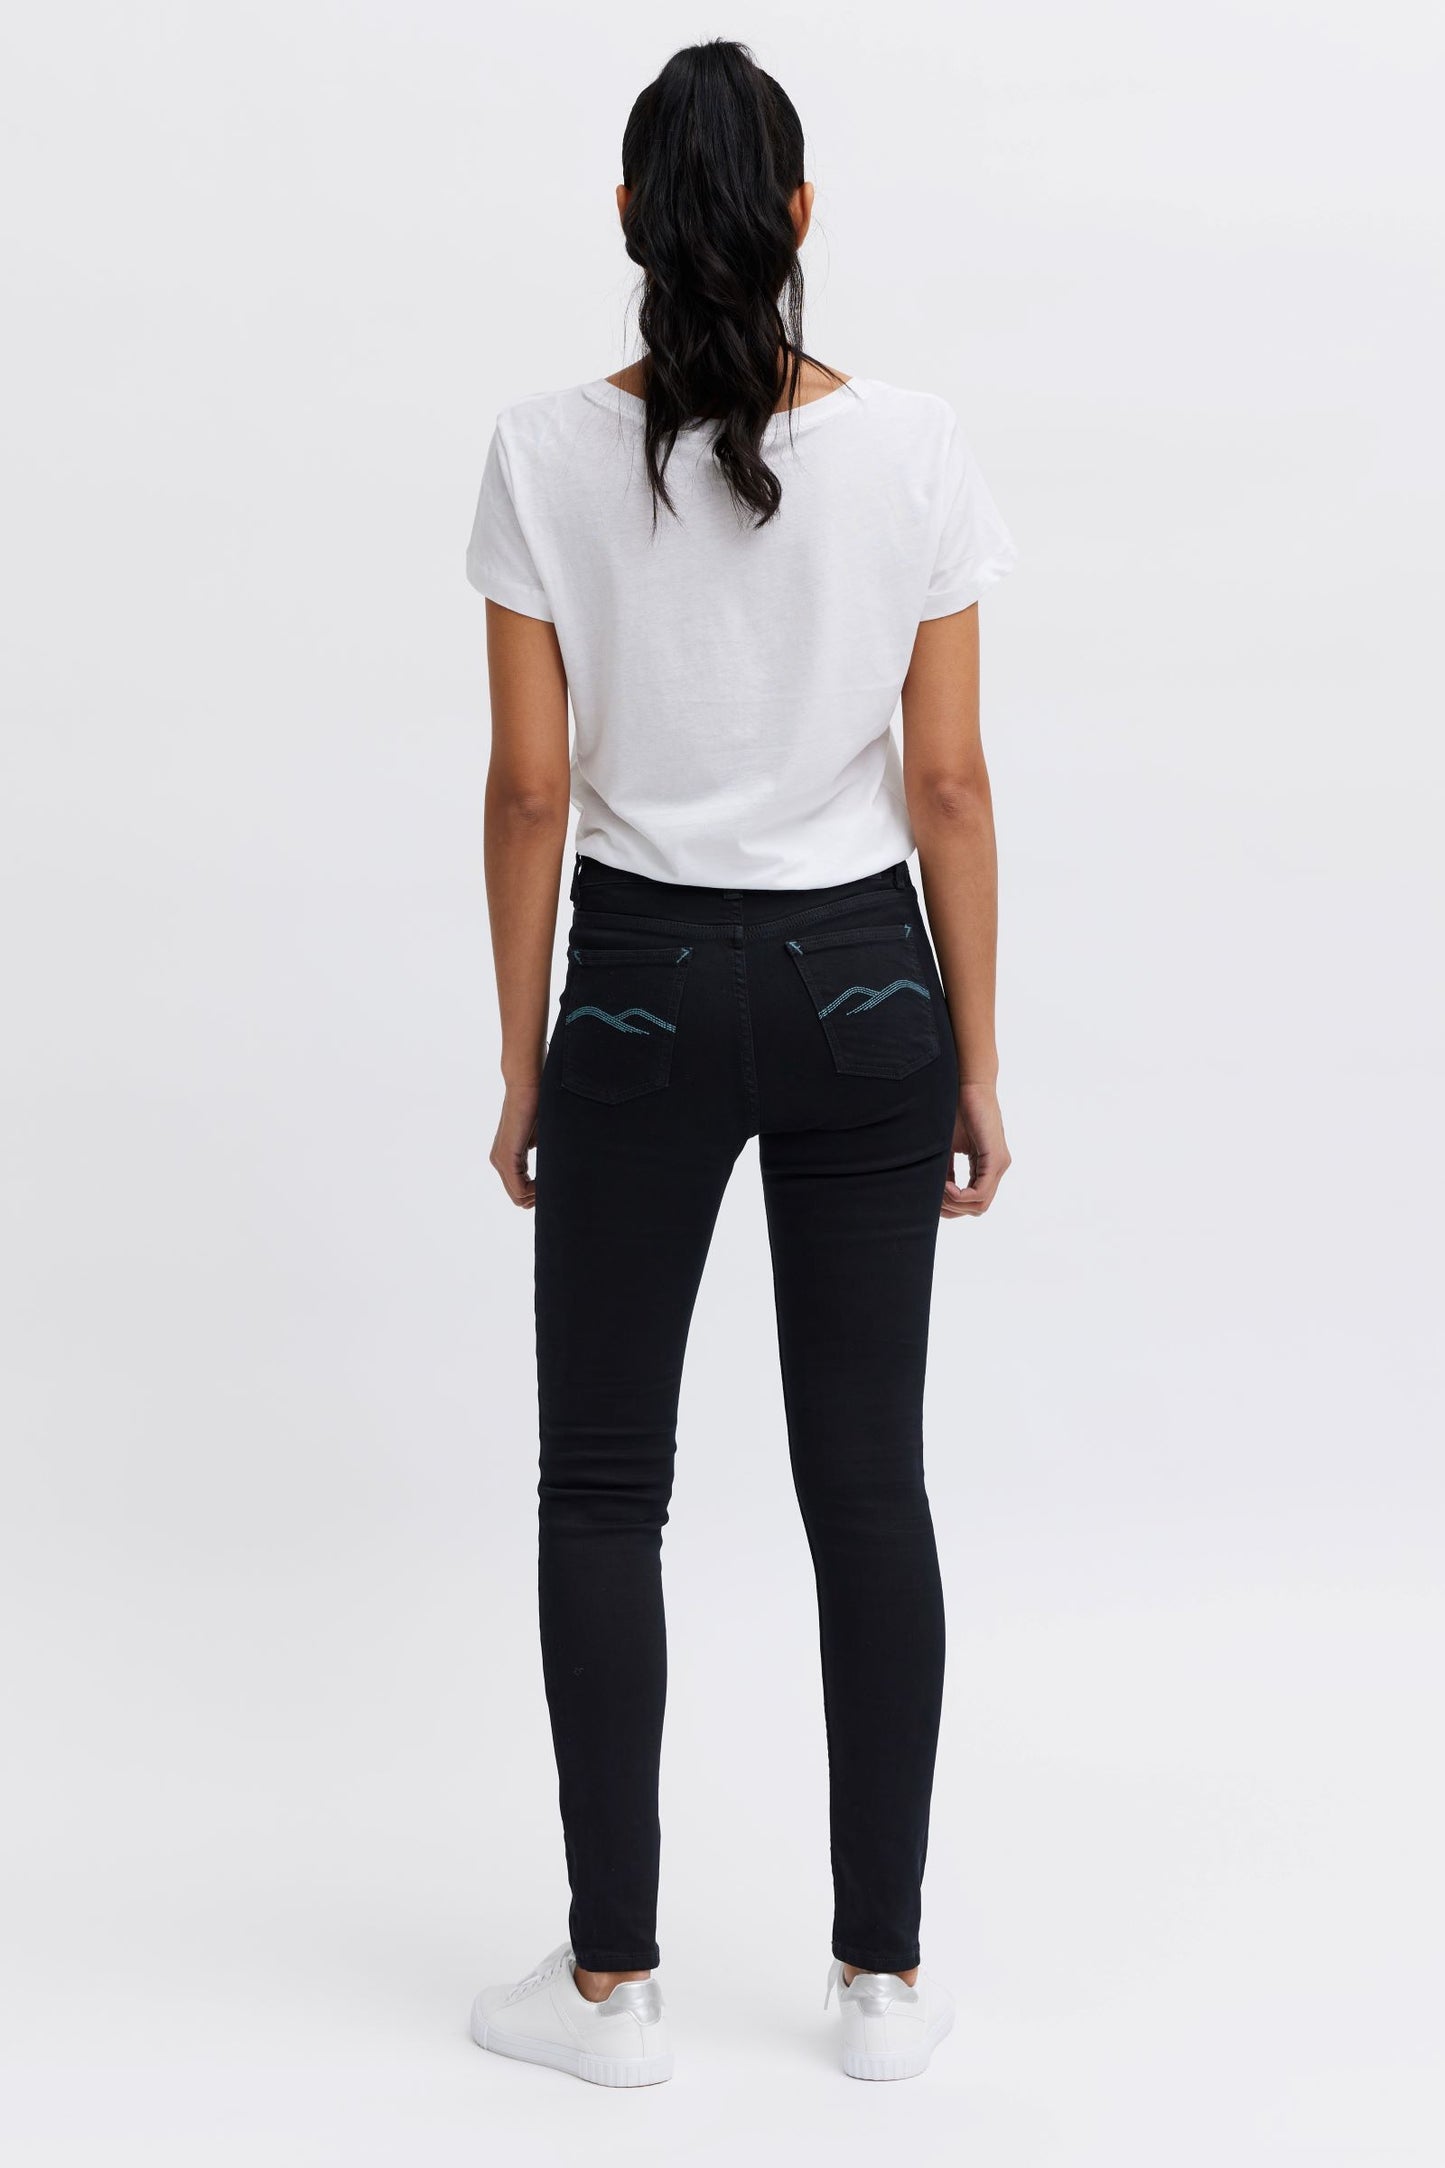 The best organic cotton jeans for women - Black body shaping fit